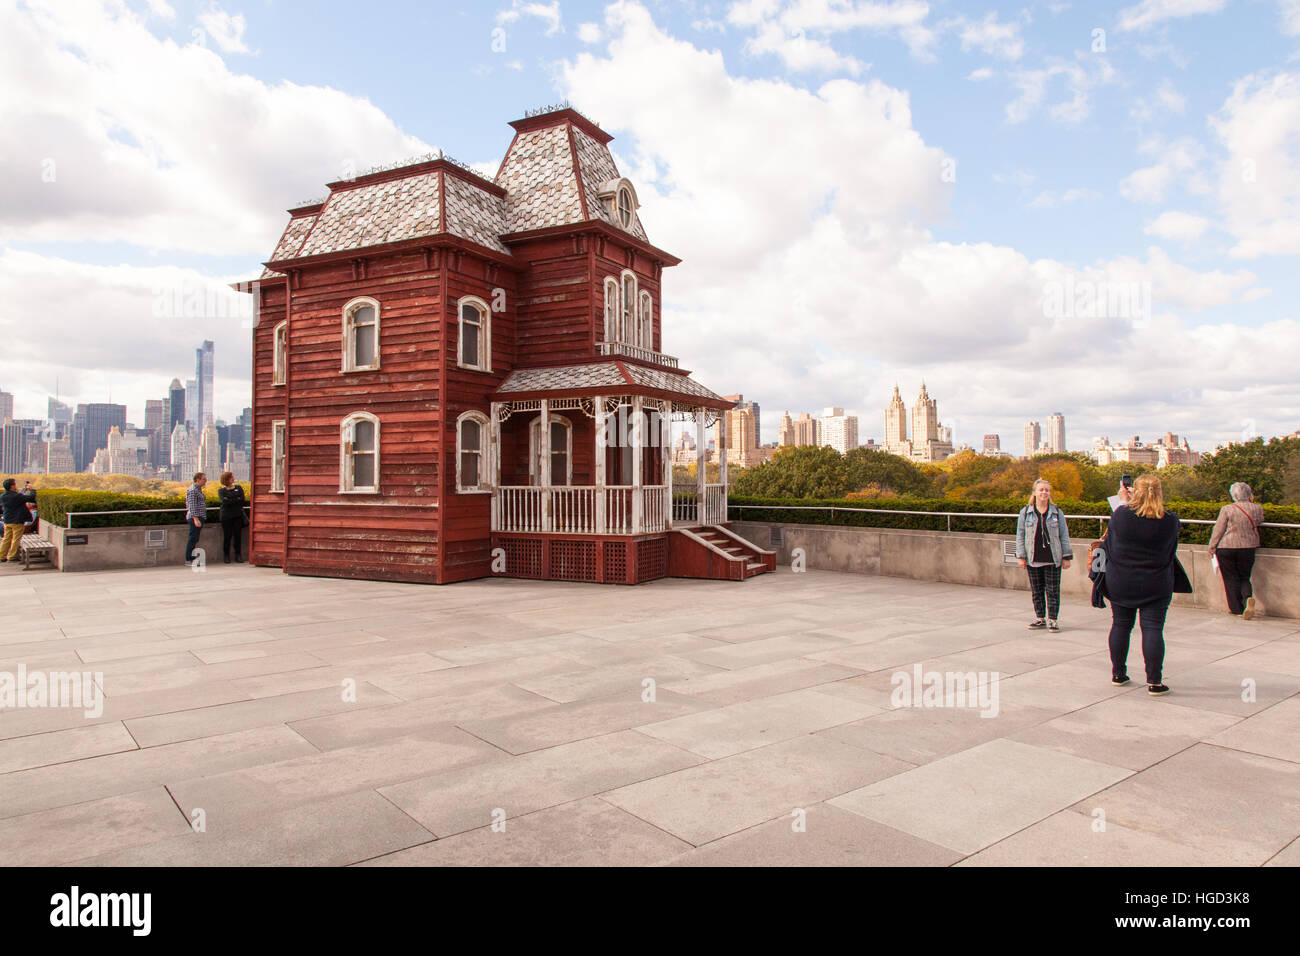 Cornelia Parker Transitional Object (PsychoBarn) a prop house installed on the roof of the Met museum. New York City, America. Stock Photo